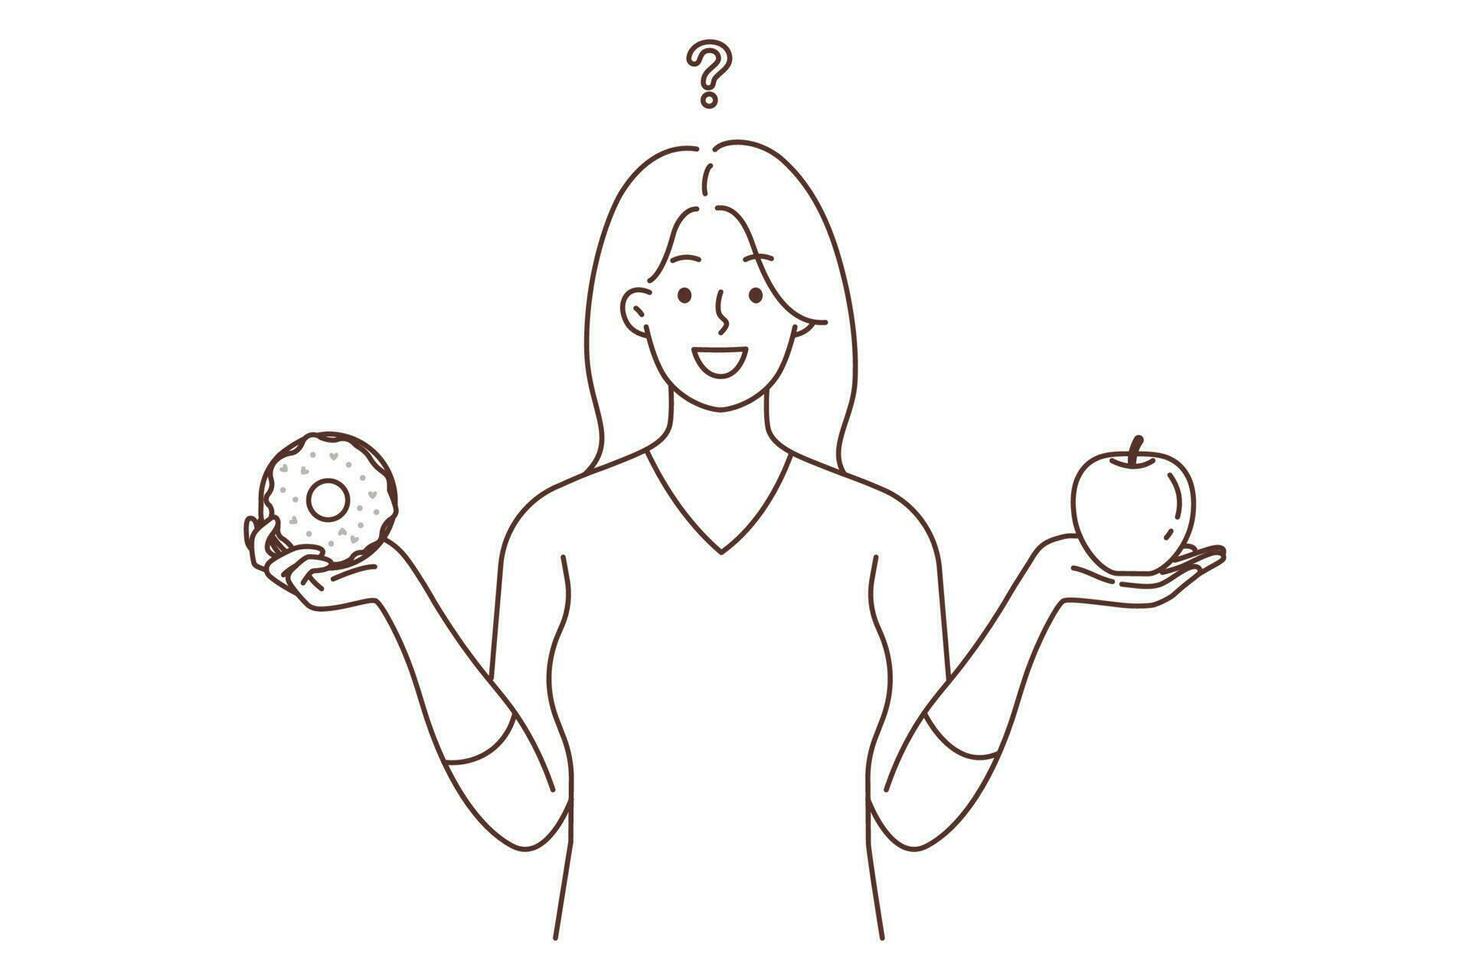 Smiling young woman choose between dessert and fruit. Happy female make choice between healthy and unhealthy food. Diet and nutrition. Vector illustration.